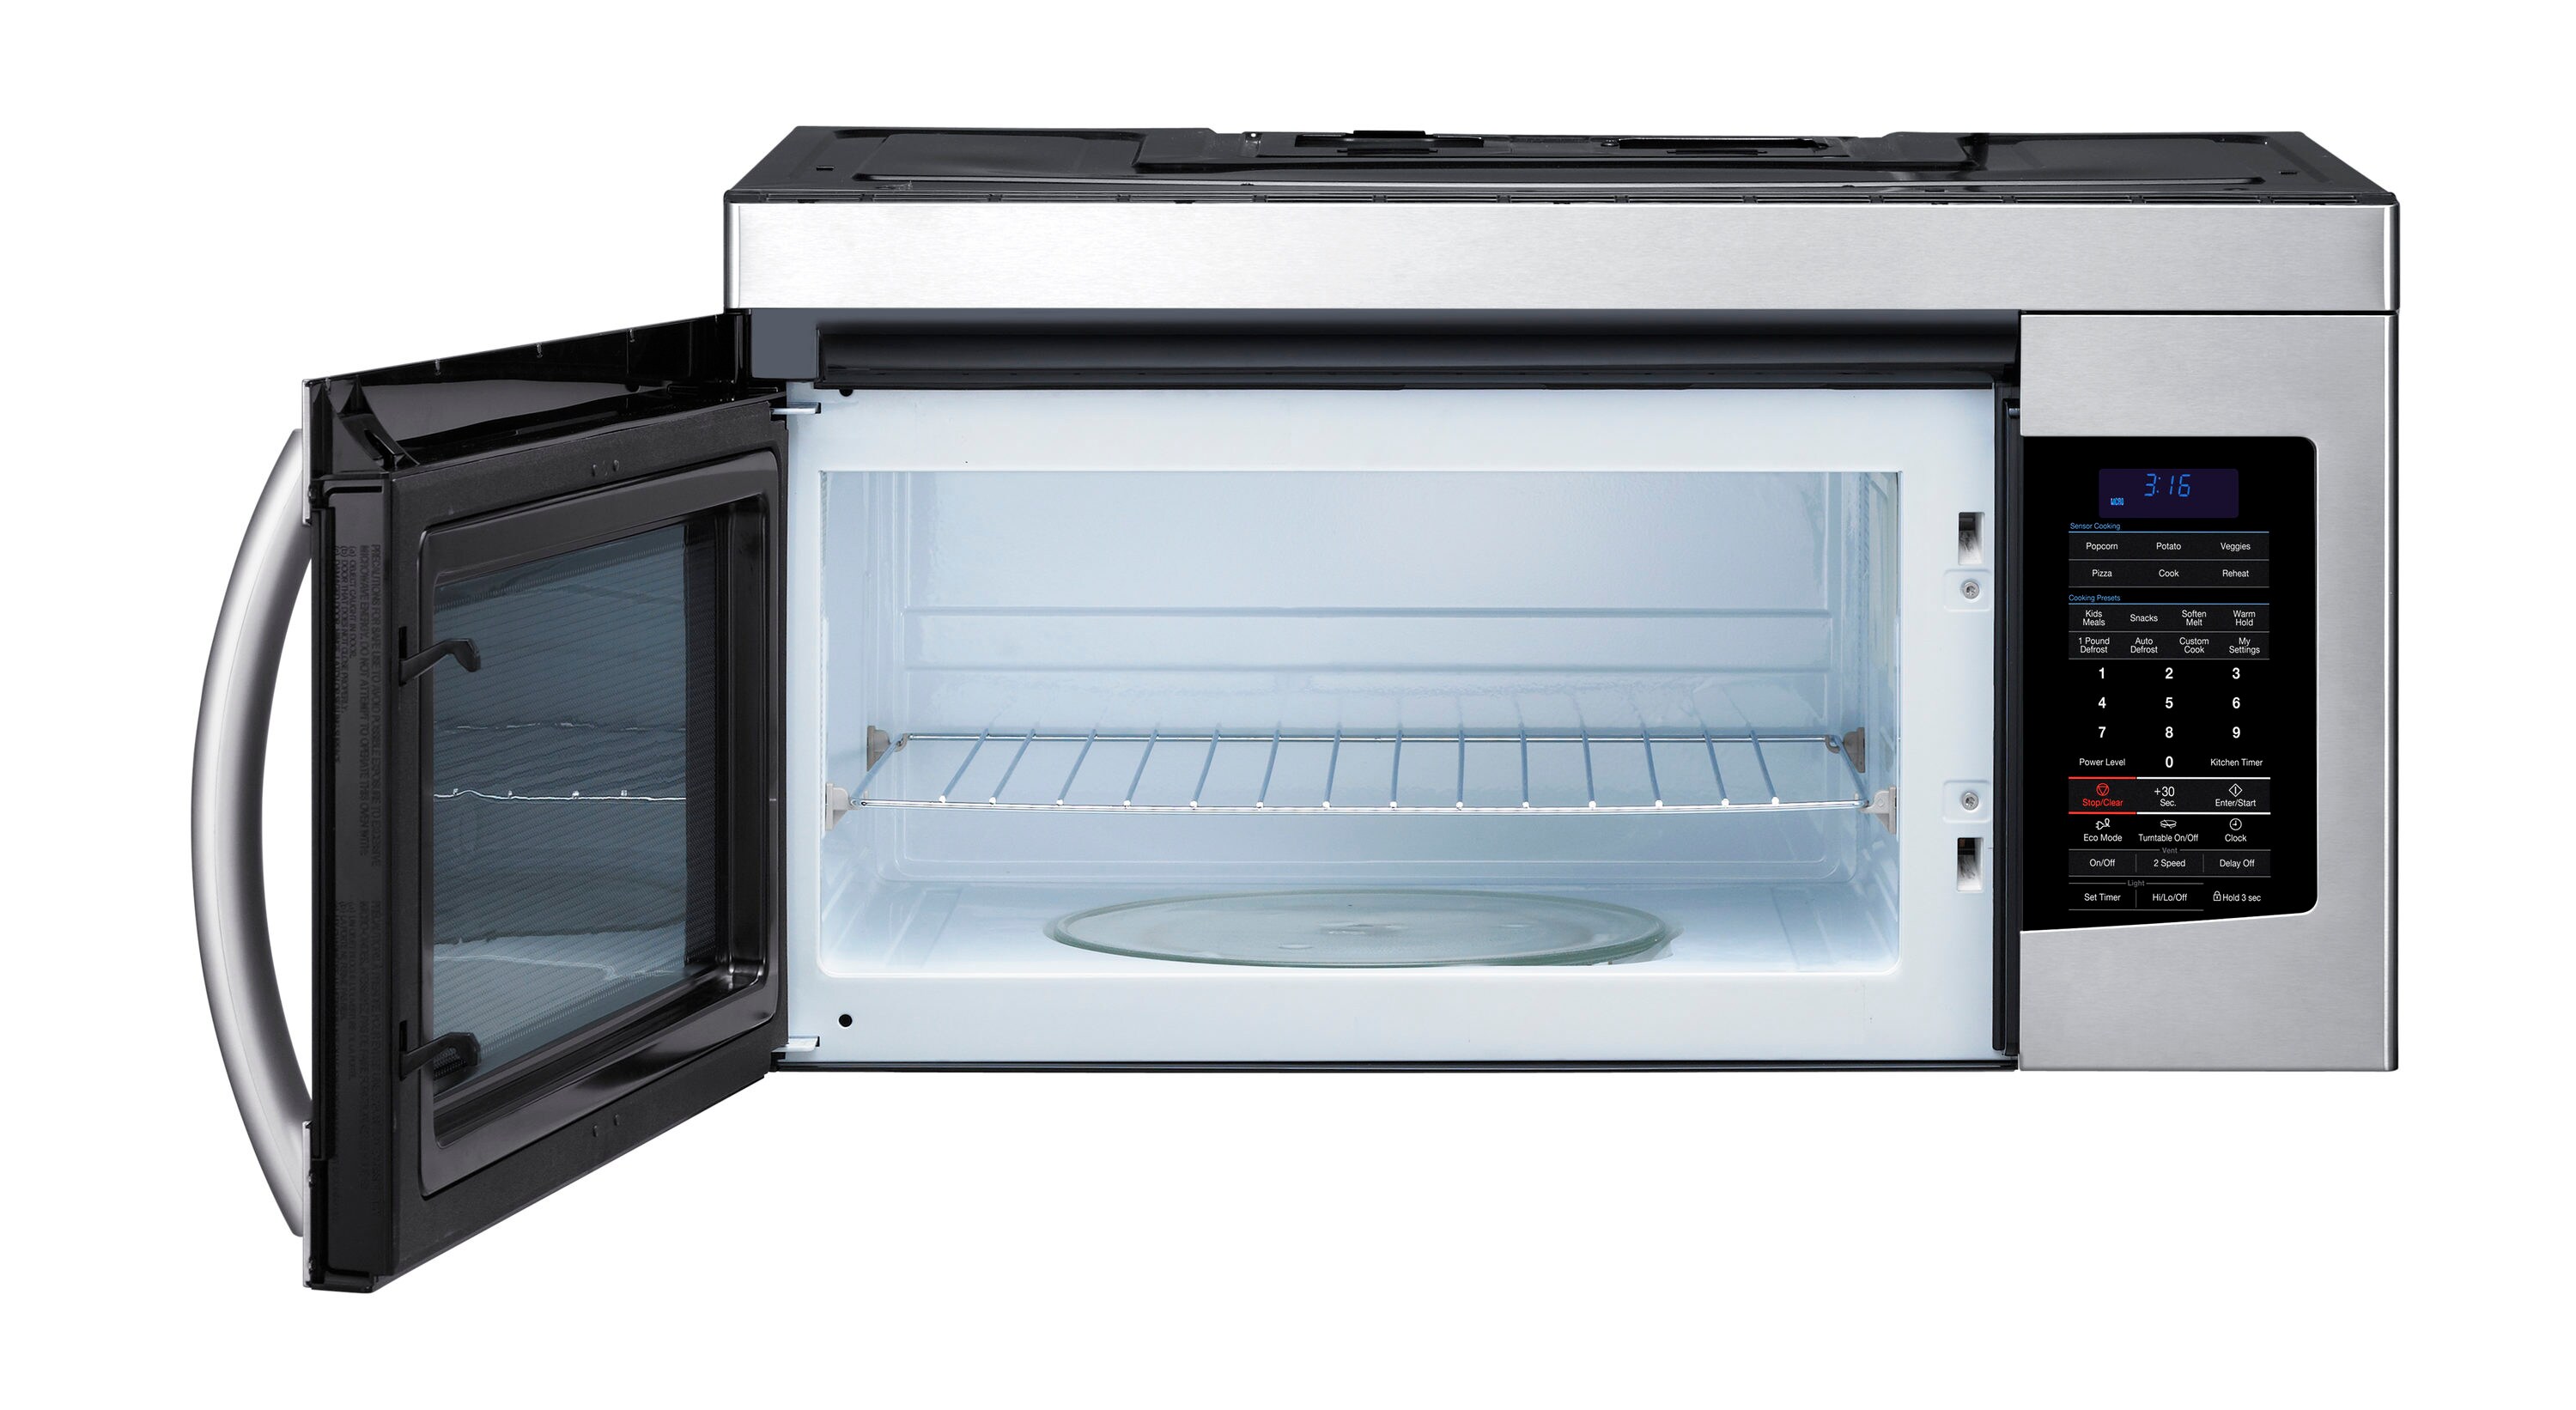 Kenmore Stainless Steel Over-the-Range Microwave – AQS